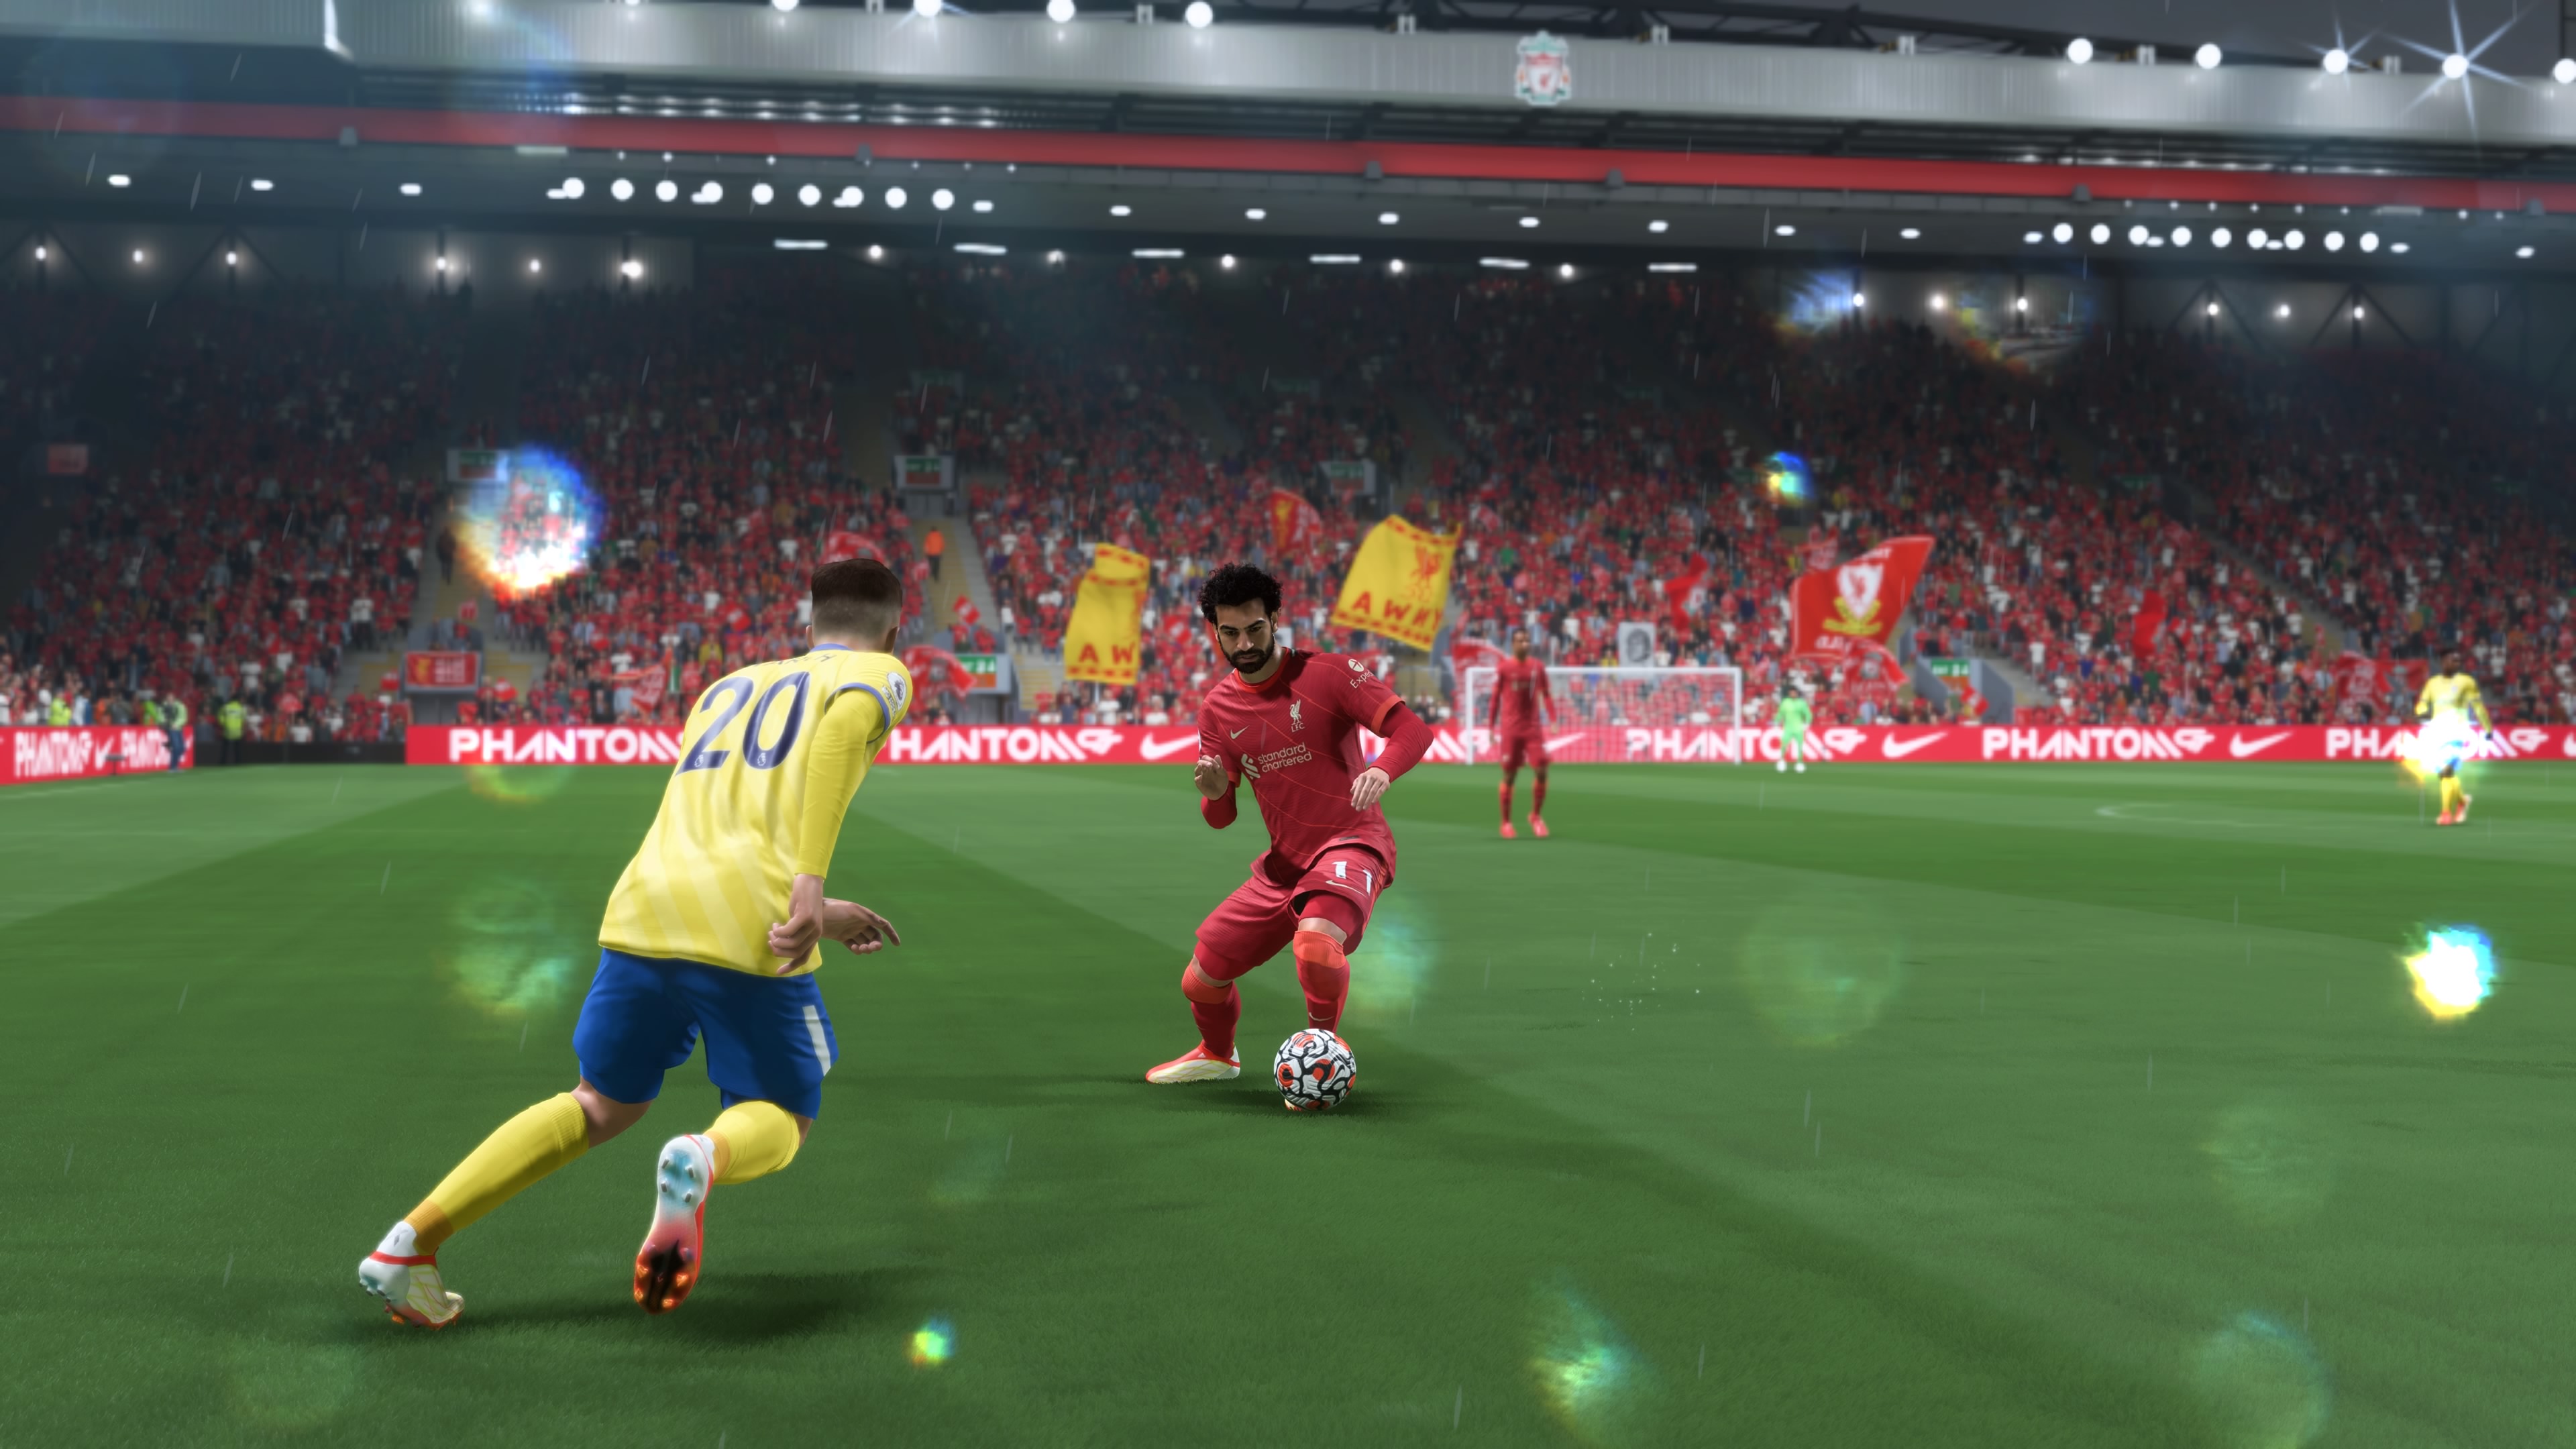 FIFA 22 skill moves guide with every trick, flick and spin